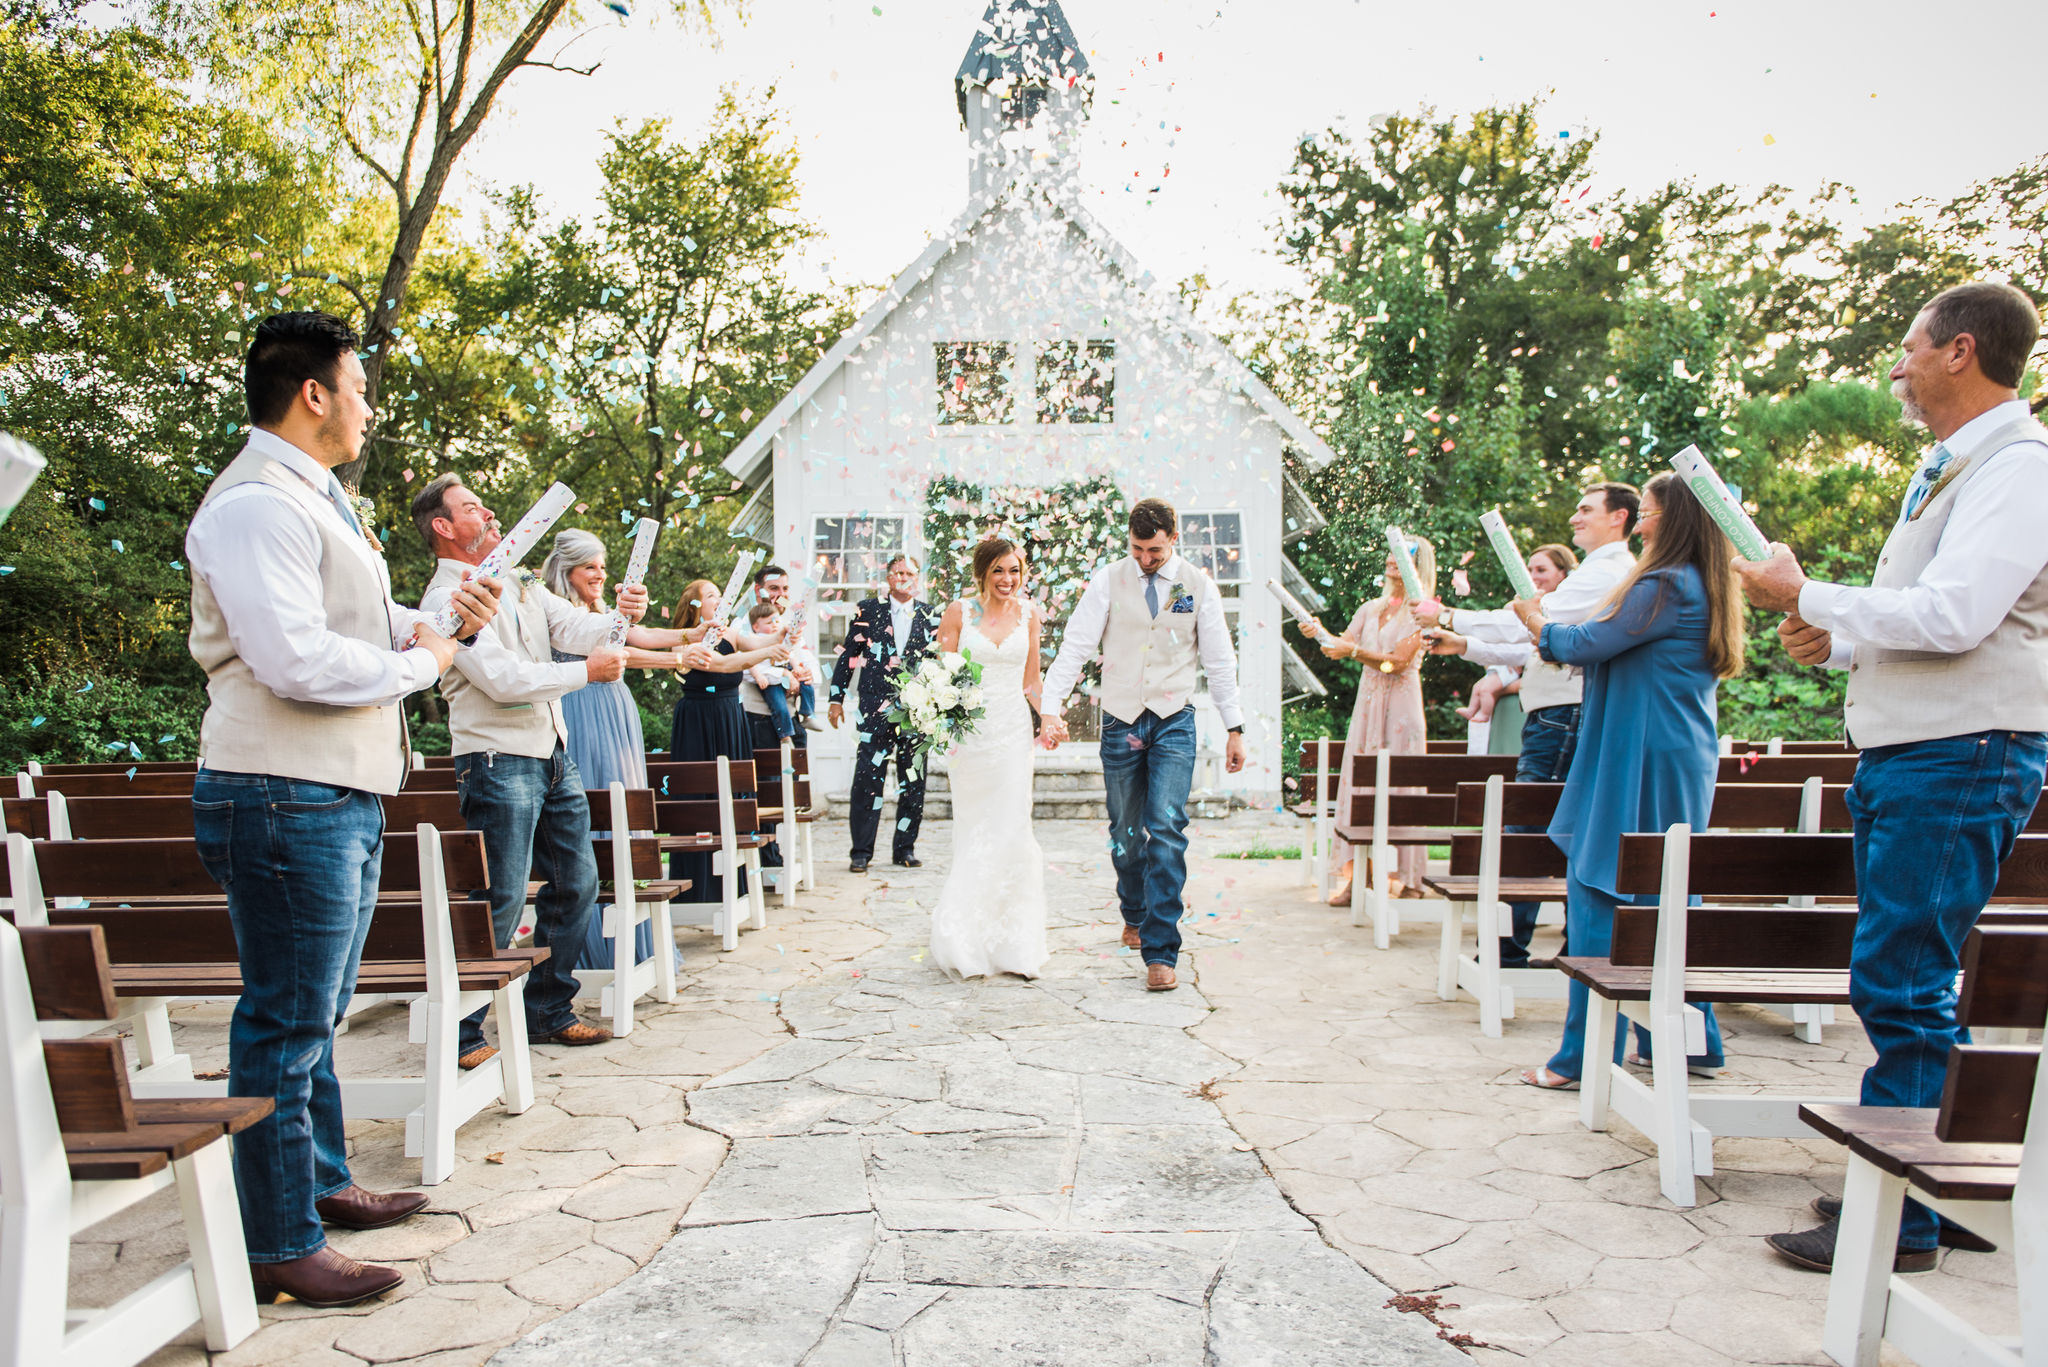 small group of family and friends line the ceremony aisle congratulating the wedding couple walking through multi colored confetti hanging gently in the air after the wedding ceremony - Elopement Package